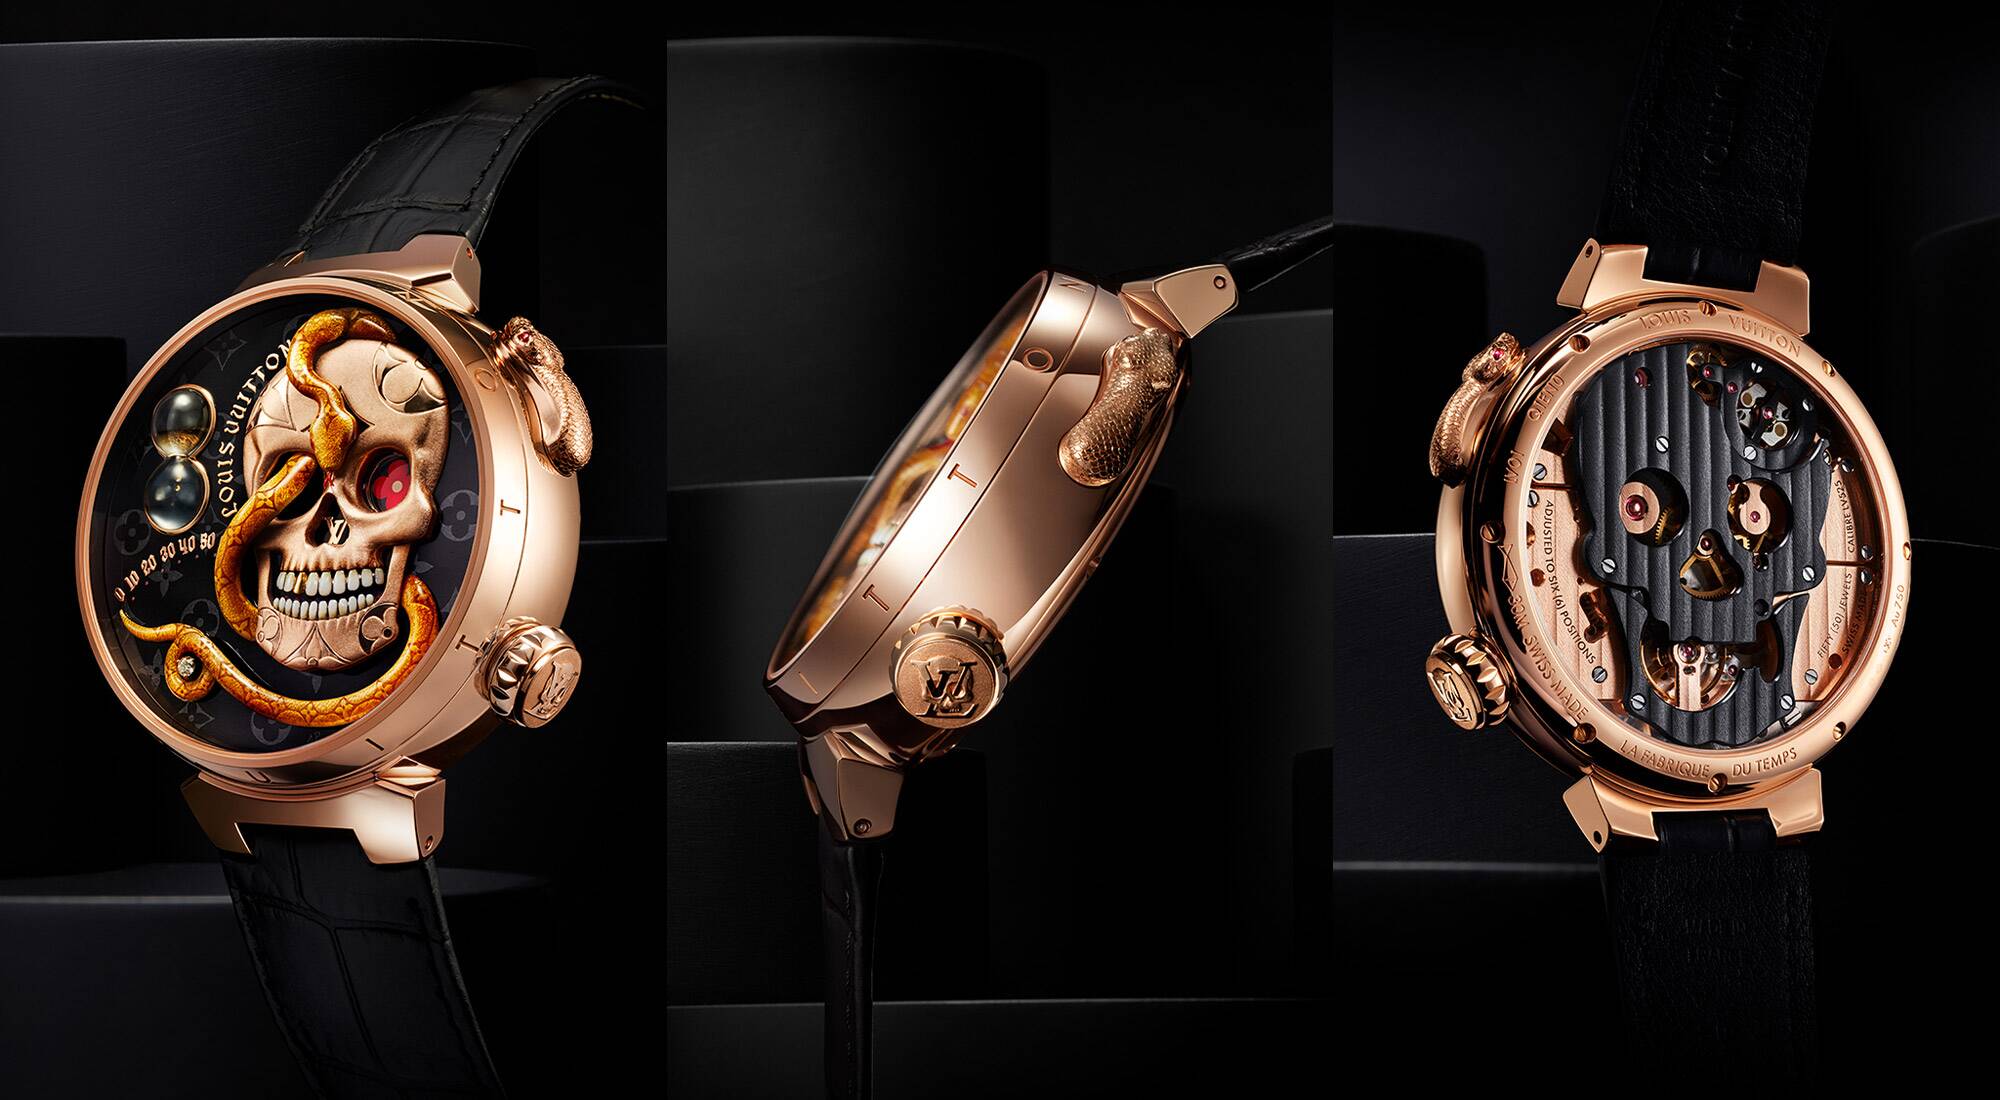 Louis Vuitton Reveals Its Subversive Style With The Tambour Carpe